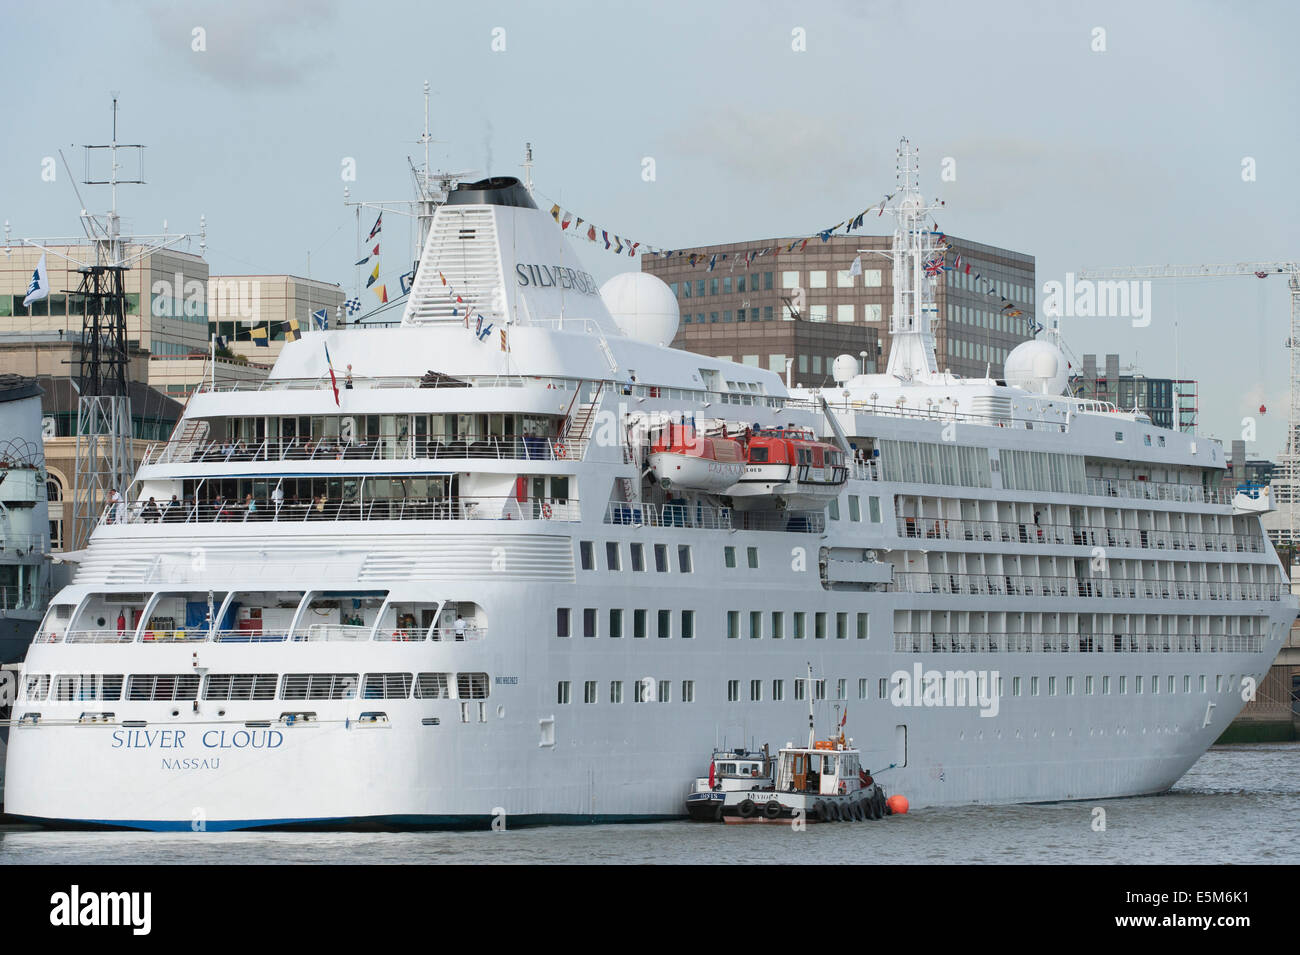 London, Tower Bridge, UK. 4th August 2014. M.V. Silver Cloud cruise ship moored alongside HMS Belfast leaves London today to Reykjavik, Iceland. Credit:  Malcolm Park editorial/Alamy Live News Stock Photo